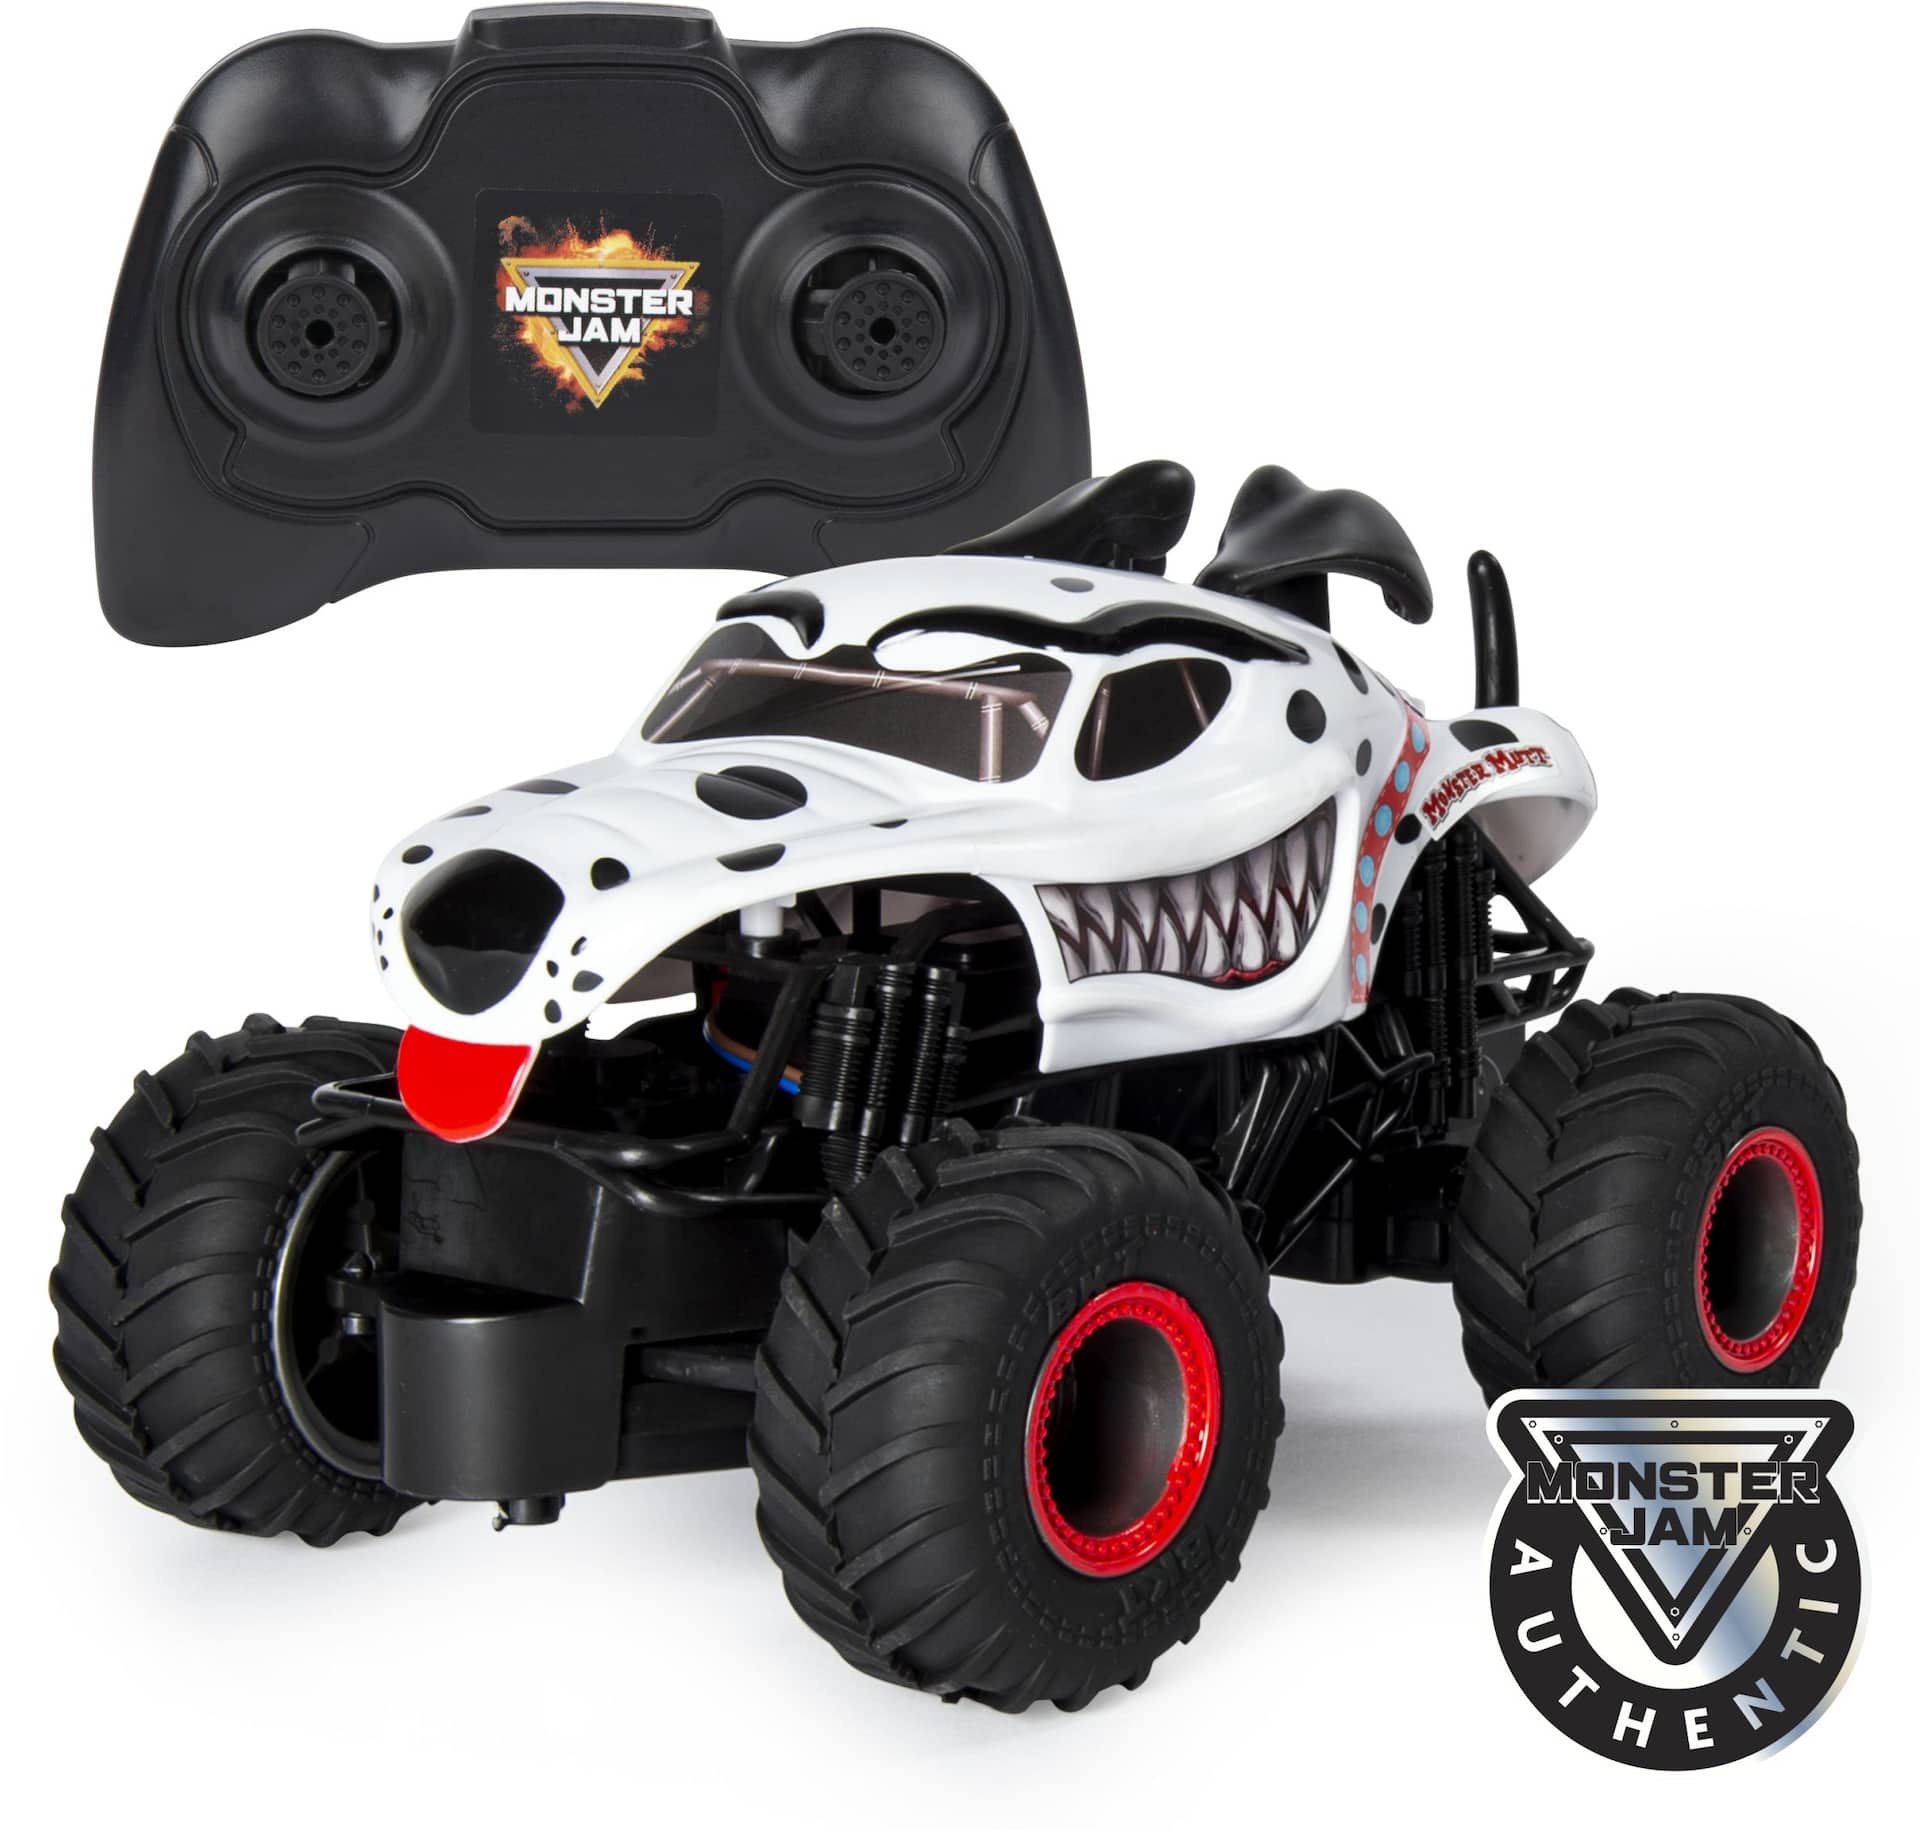 Monster Jam 1:24 Scale Remote Controlled Truck Vehicle Toy